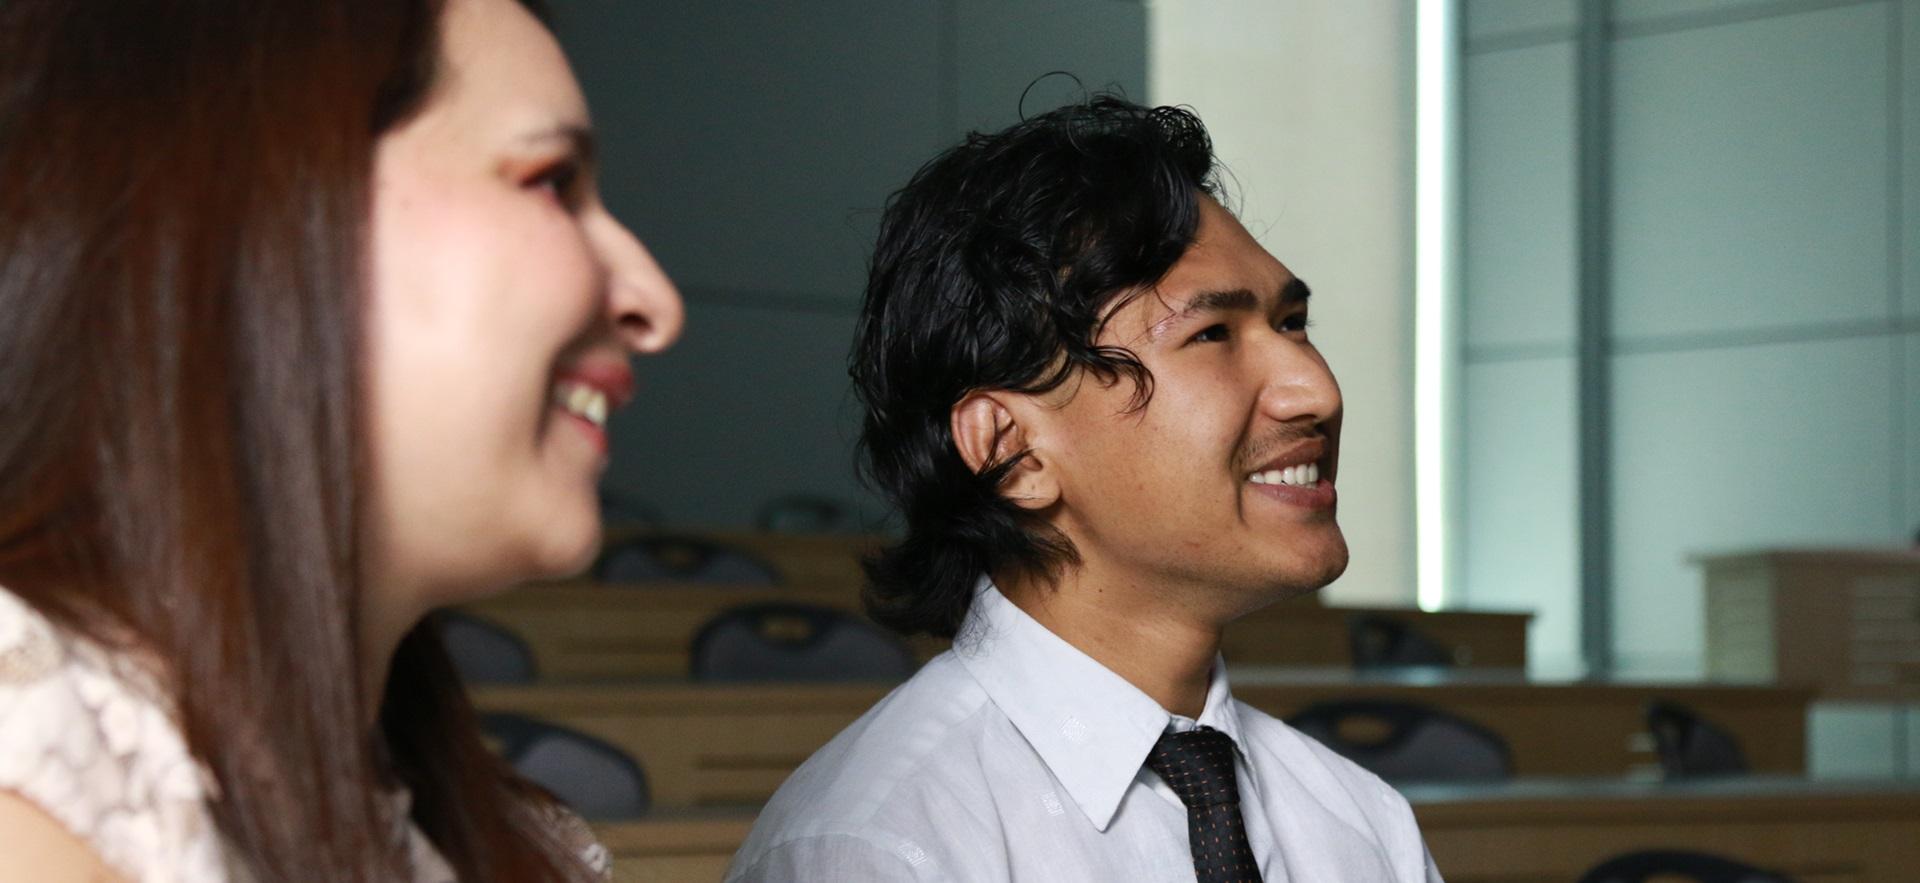 Two business students in class smiling looking towards instructor off screen